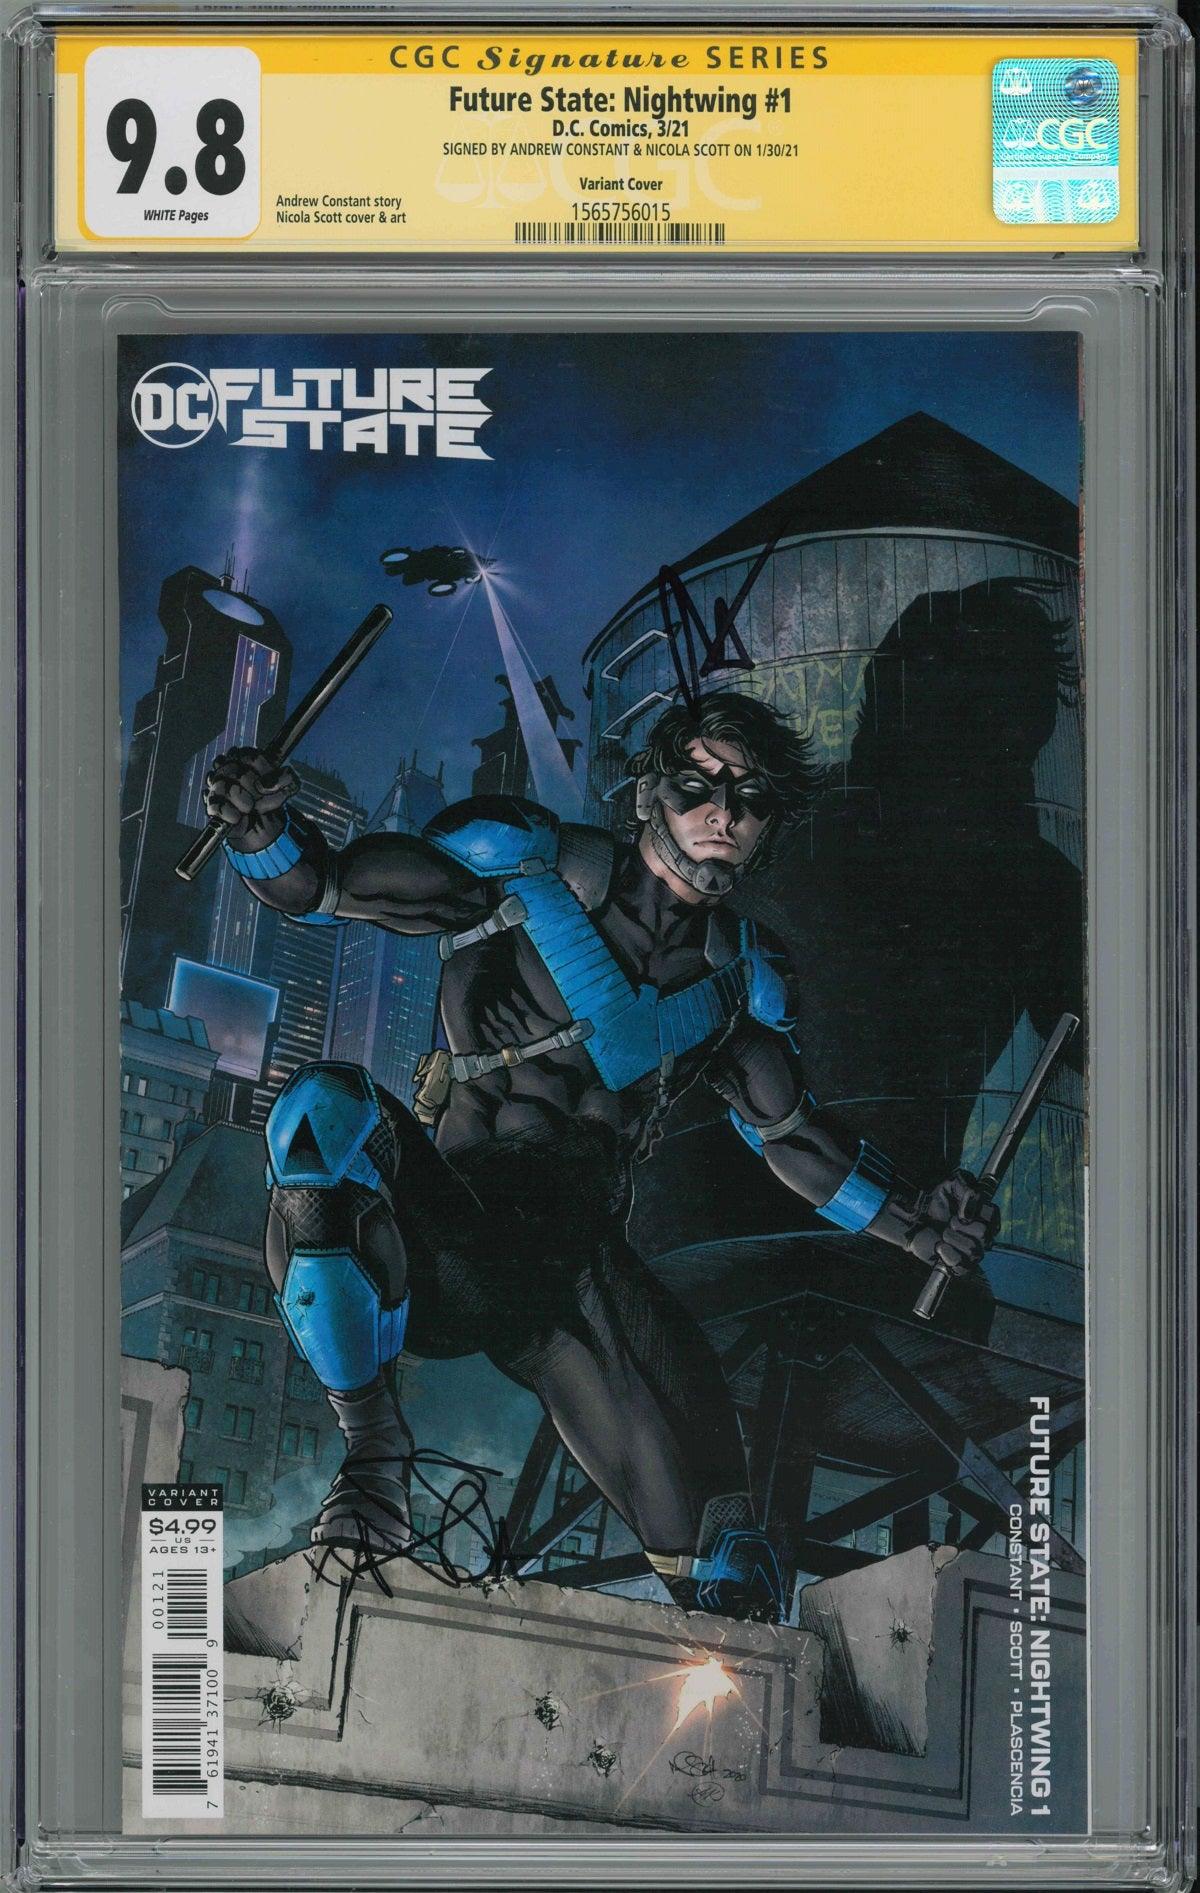 CGC FUTURE STATE NIGHTWING #1 CVR B VARIANT (9.8) SIGNATURE SERIES - SIGNED BY ANDREW CONSTANT & NICOLA SCOTT - Kings Comics